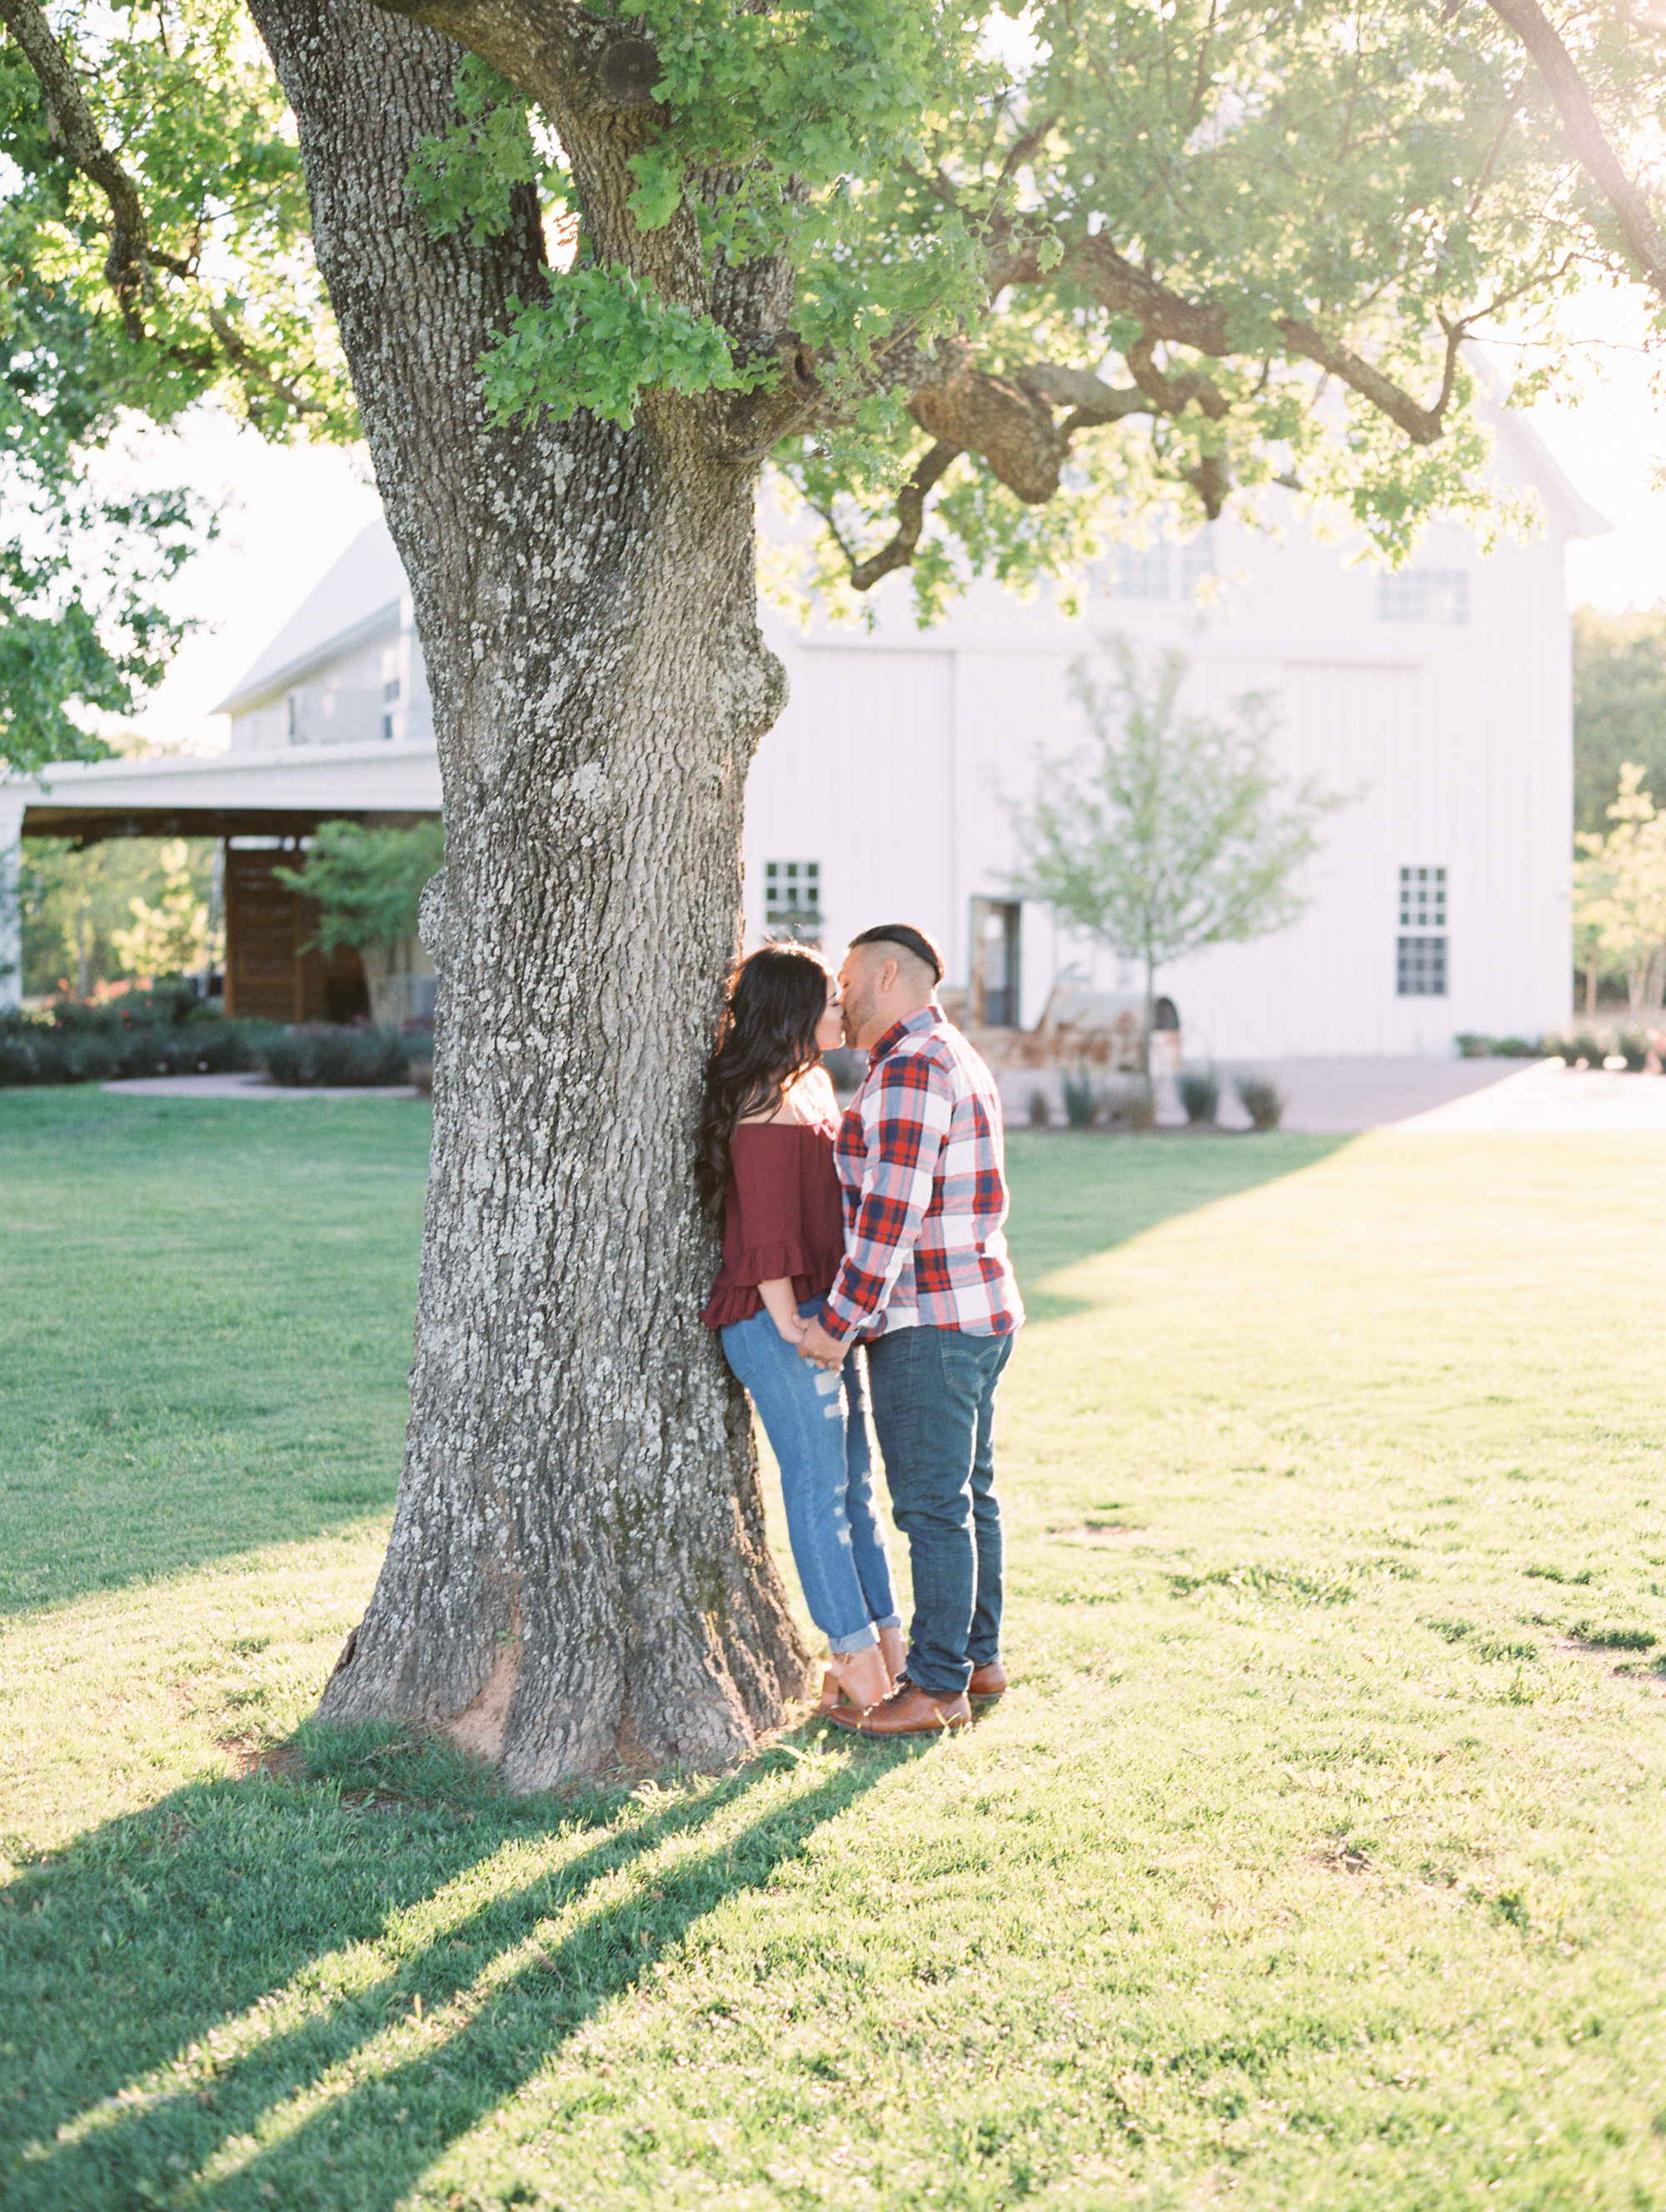 Engagement session ideas from the White Sparrow Barn